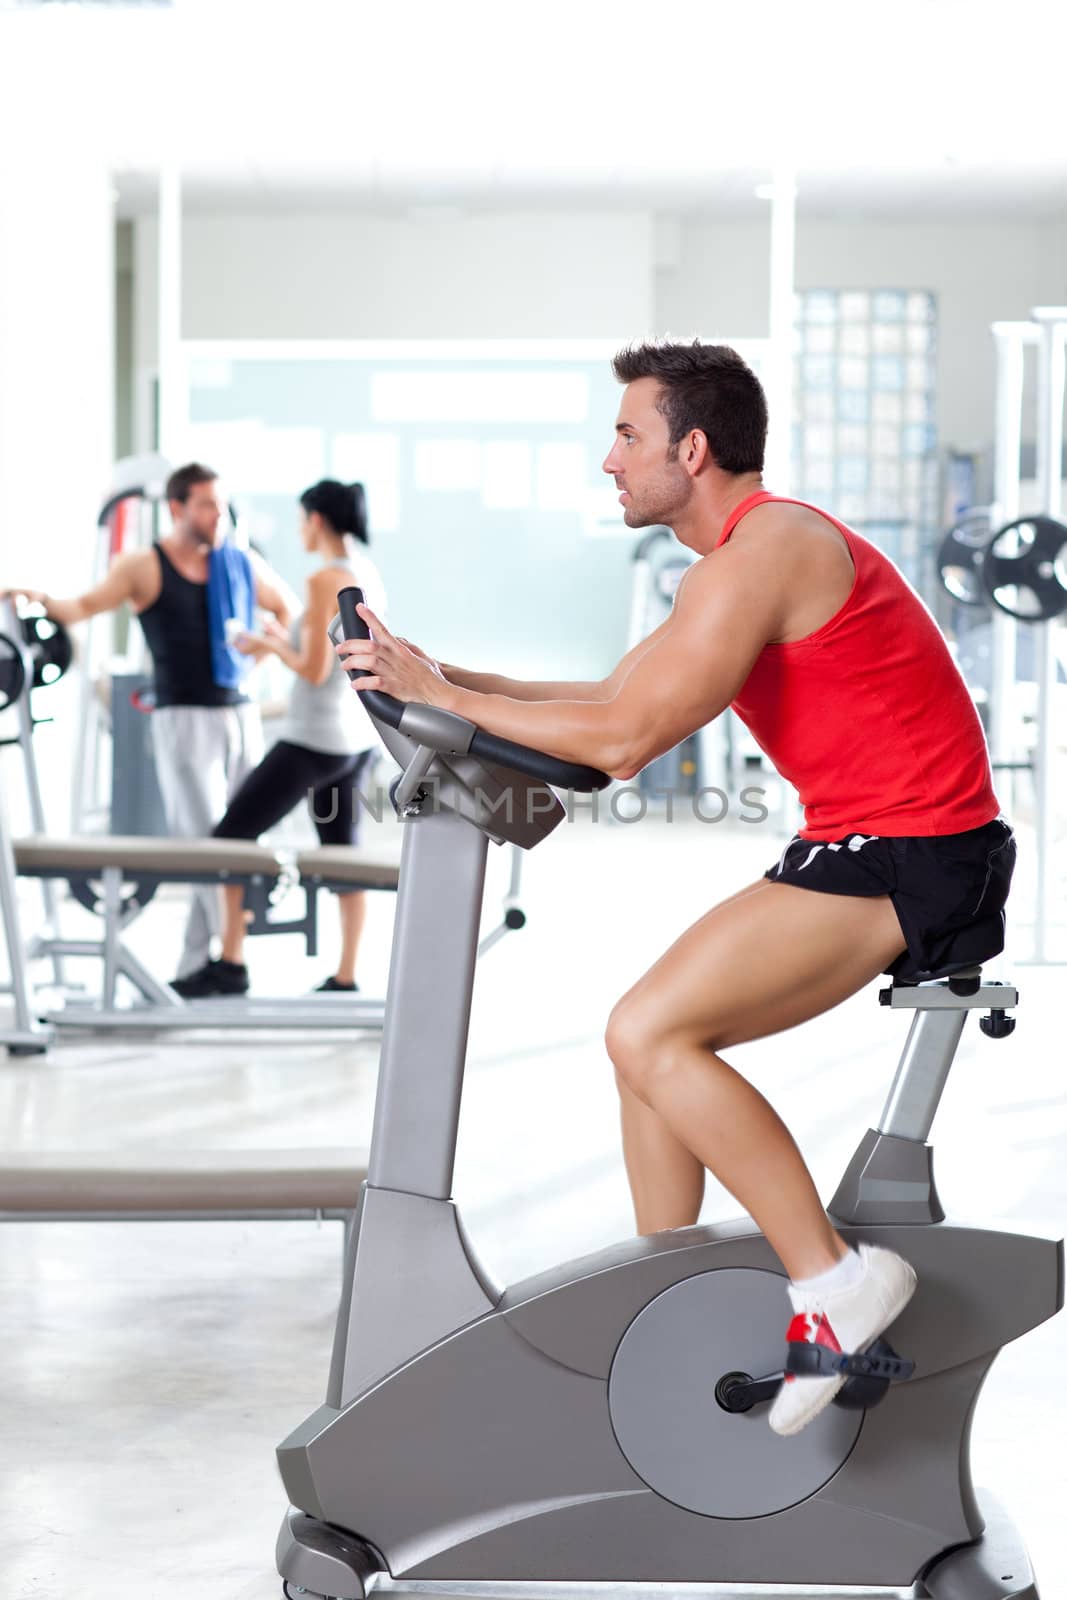 man on stationary bicycle at sport fitness gym interior